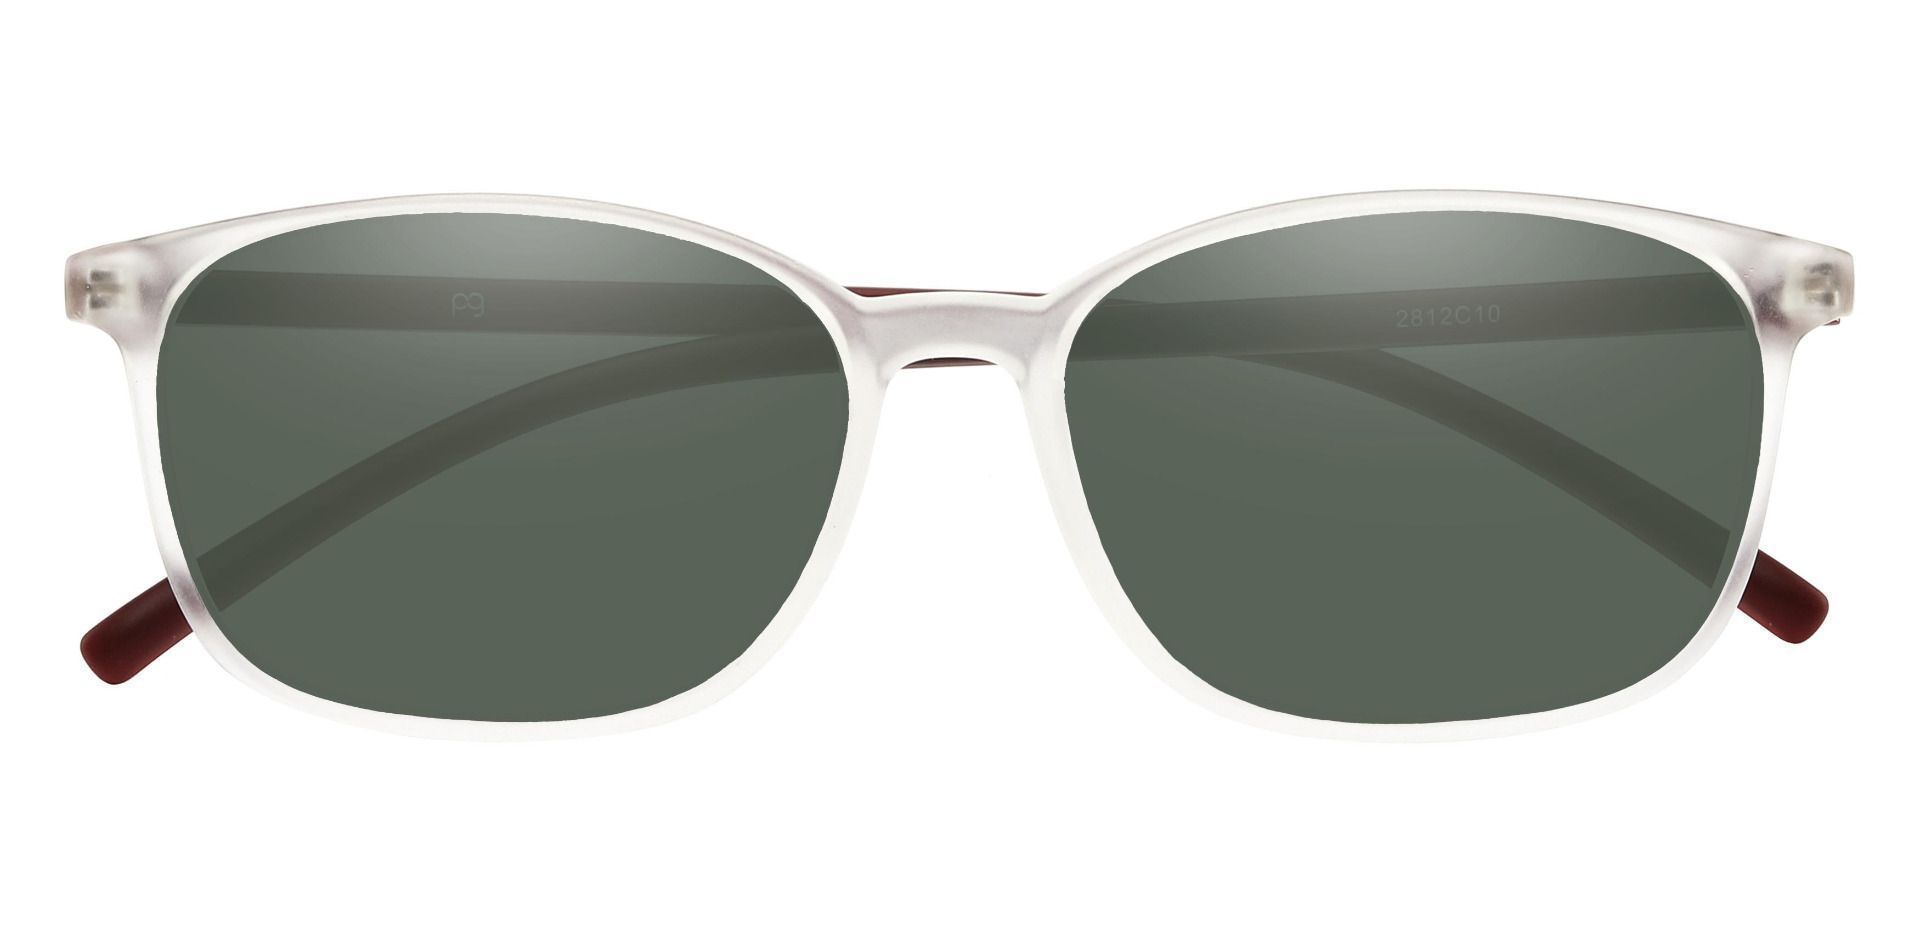 Onyx Square Lined Bifocal Sunglasses - Clear Frame With Green Lenses